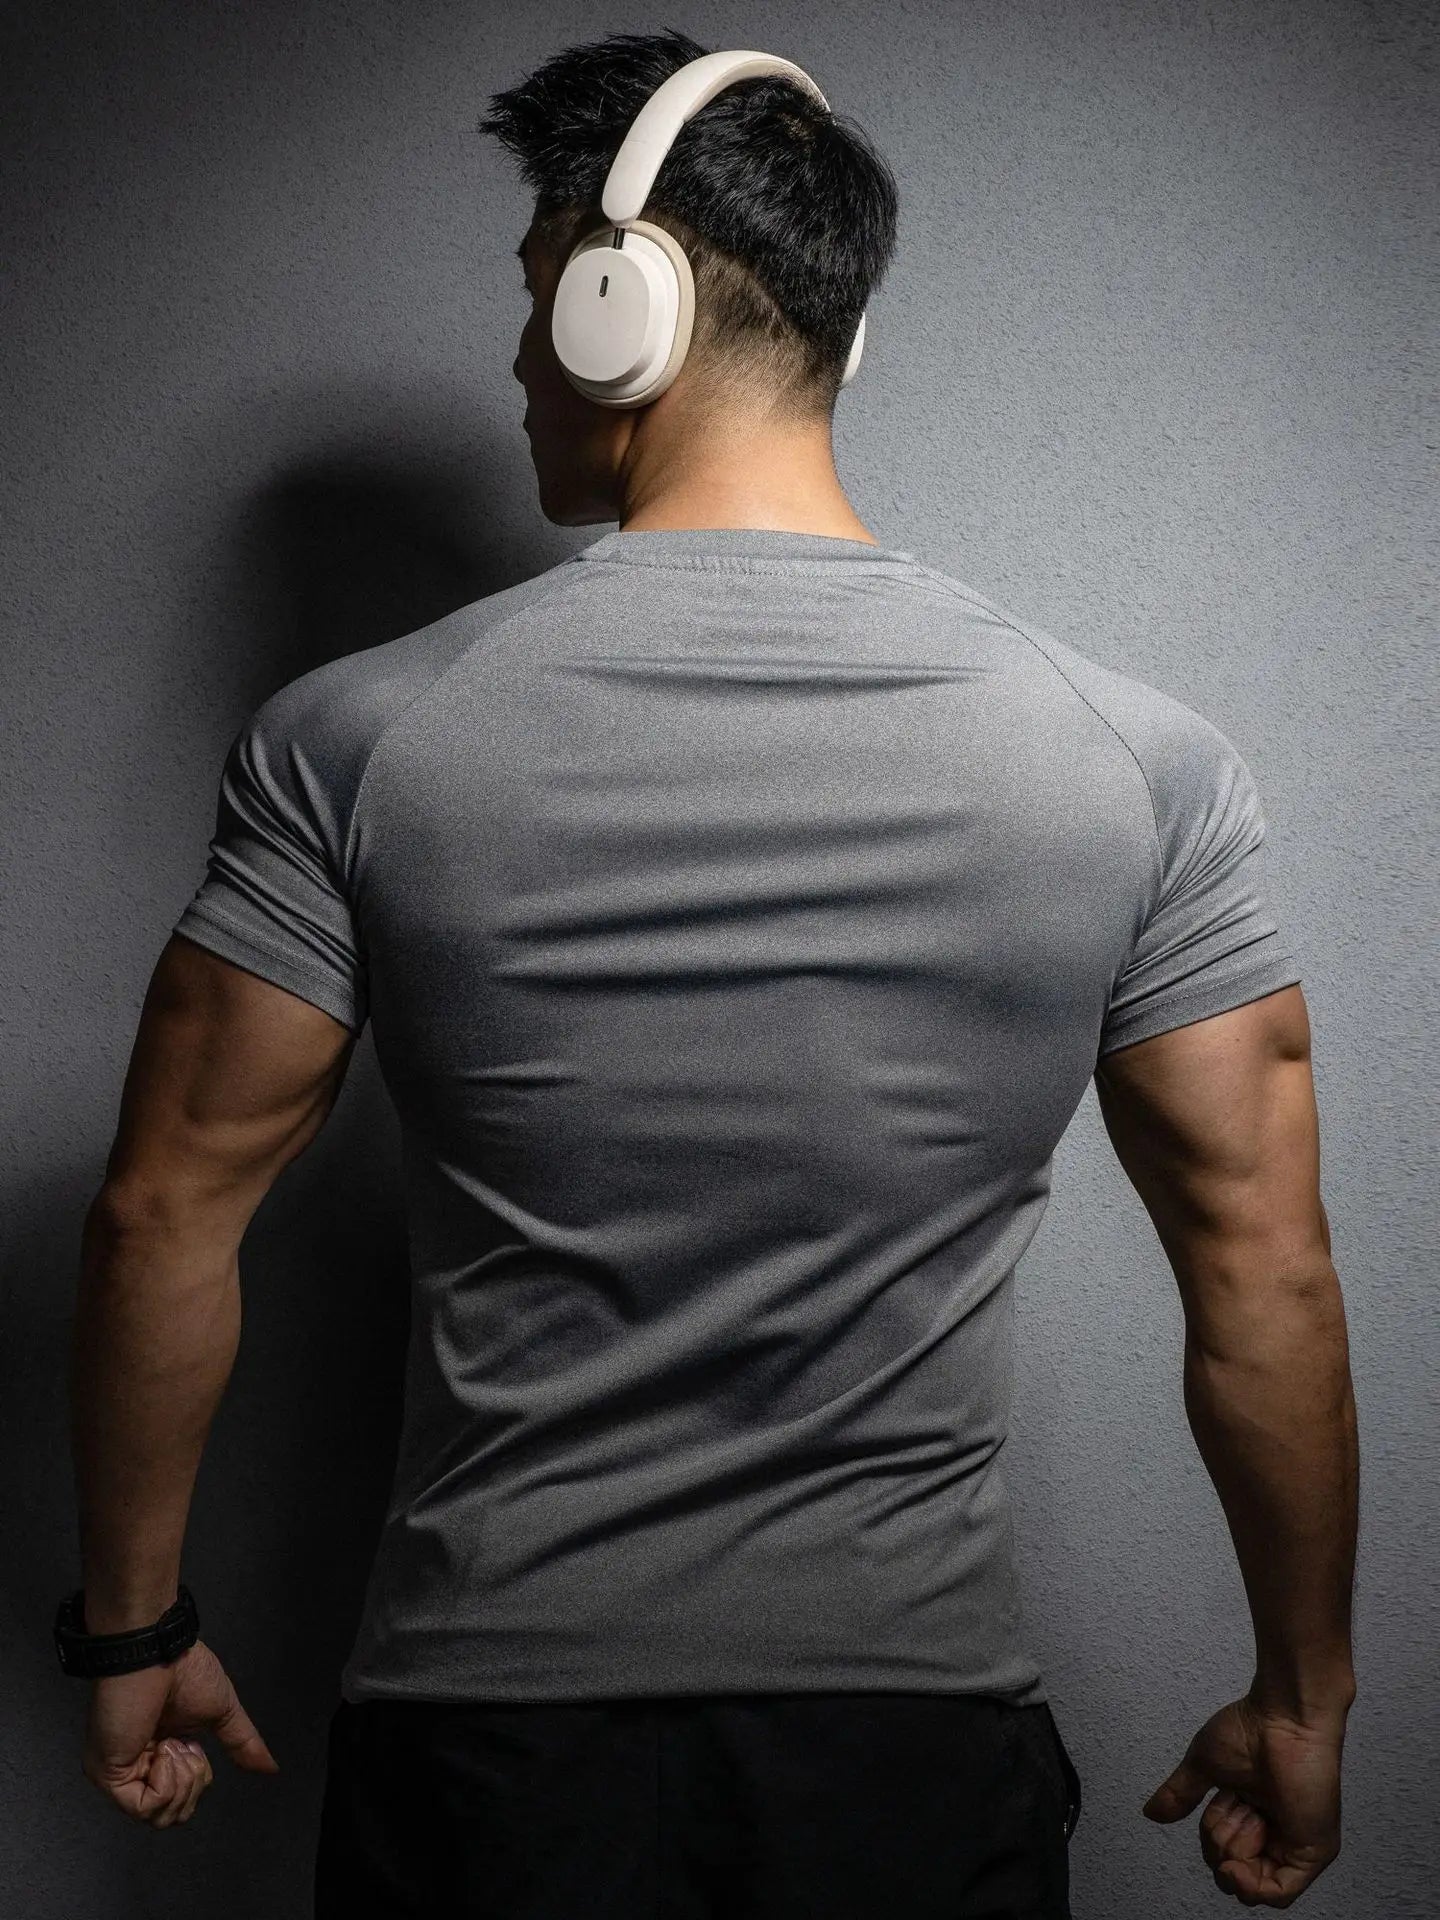  Stretchy quick drying short sleeve T-shirt for Men back view grey t-shirt